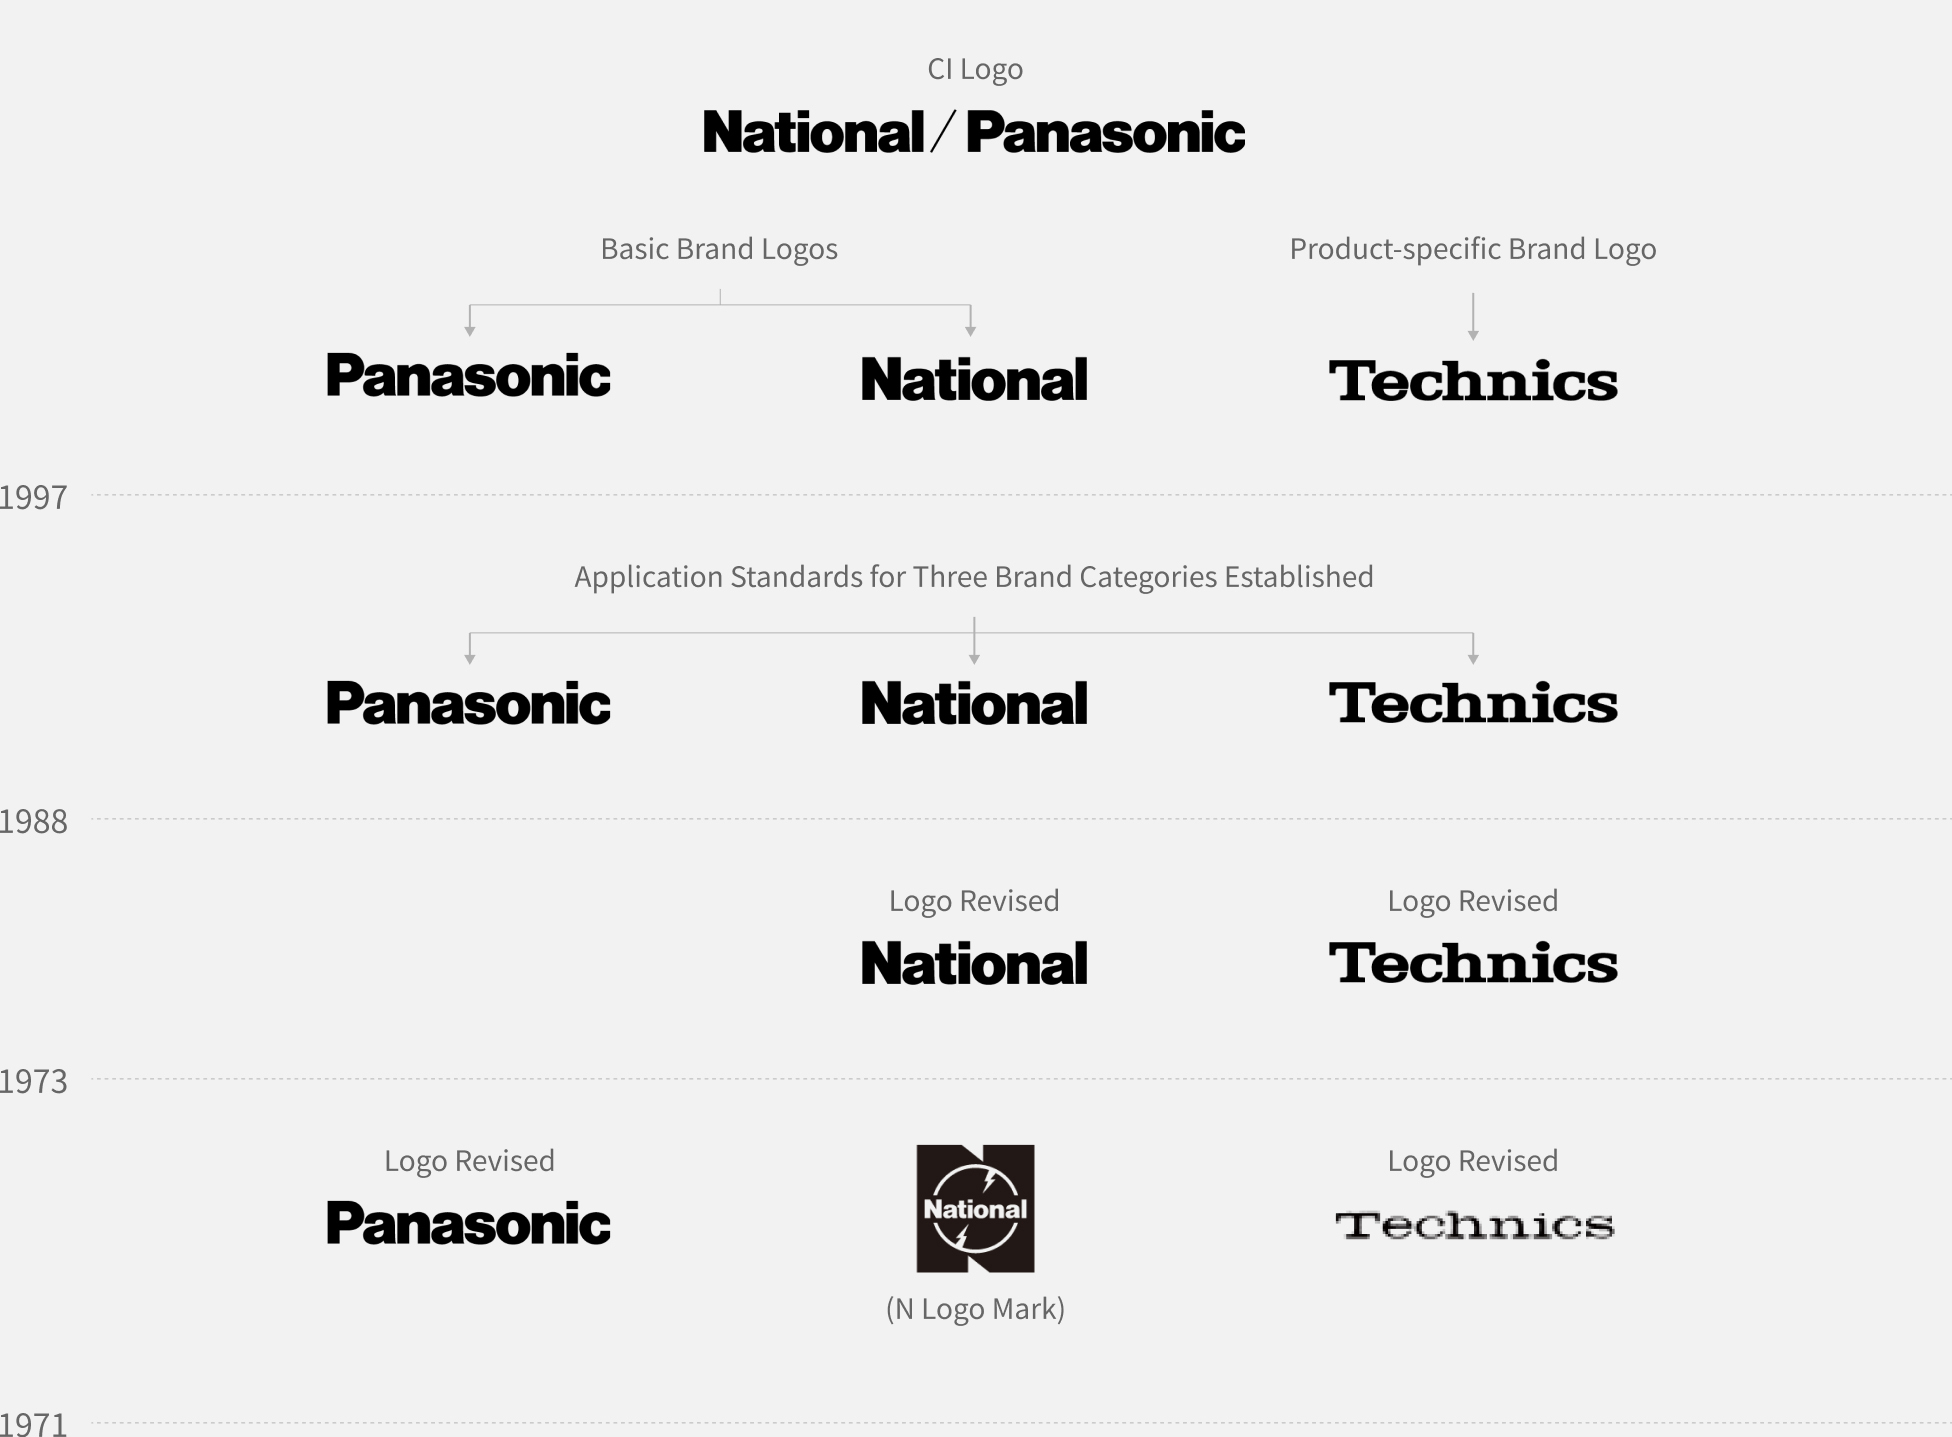 1997: "National/Panasonic" was registered as our CI mark, and "Panasonic" and "National" as our general trademarks, and "Technics" as our specific trademark. 1988: Standard for our brand use by product category was adopted as - "Panasonic," "National," and "Technics." 1973: Revision of logos -  "National," "N-Mark," and "Technics". 1971: Revision of logos - "Panasonic" and "Technics".